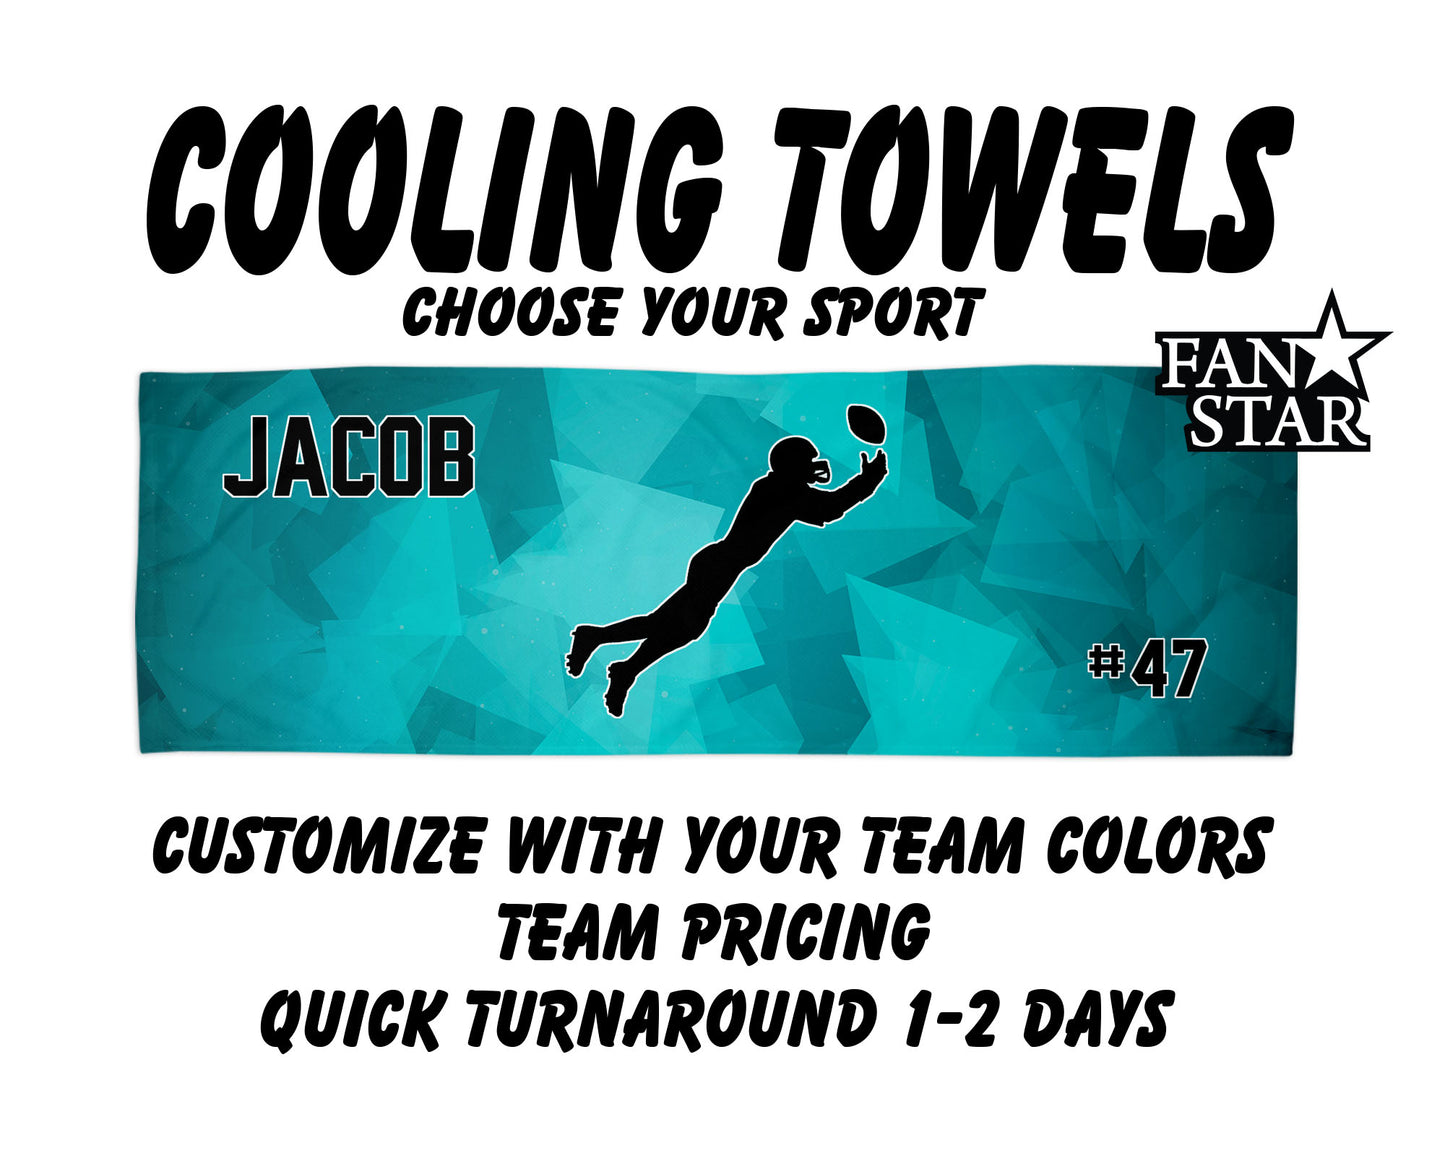 Football Cooling Towel with Prism Background